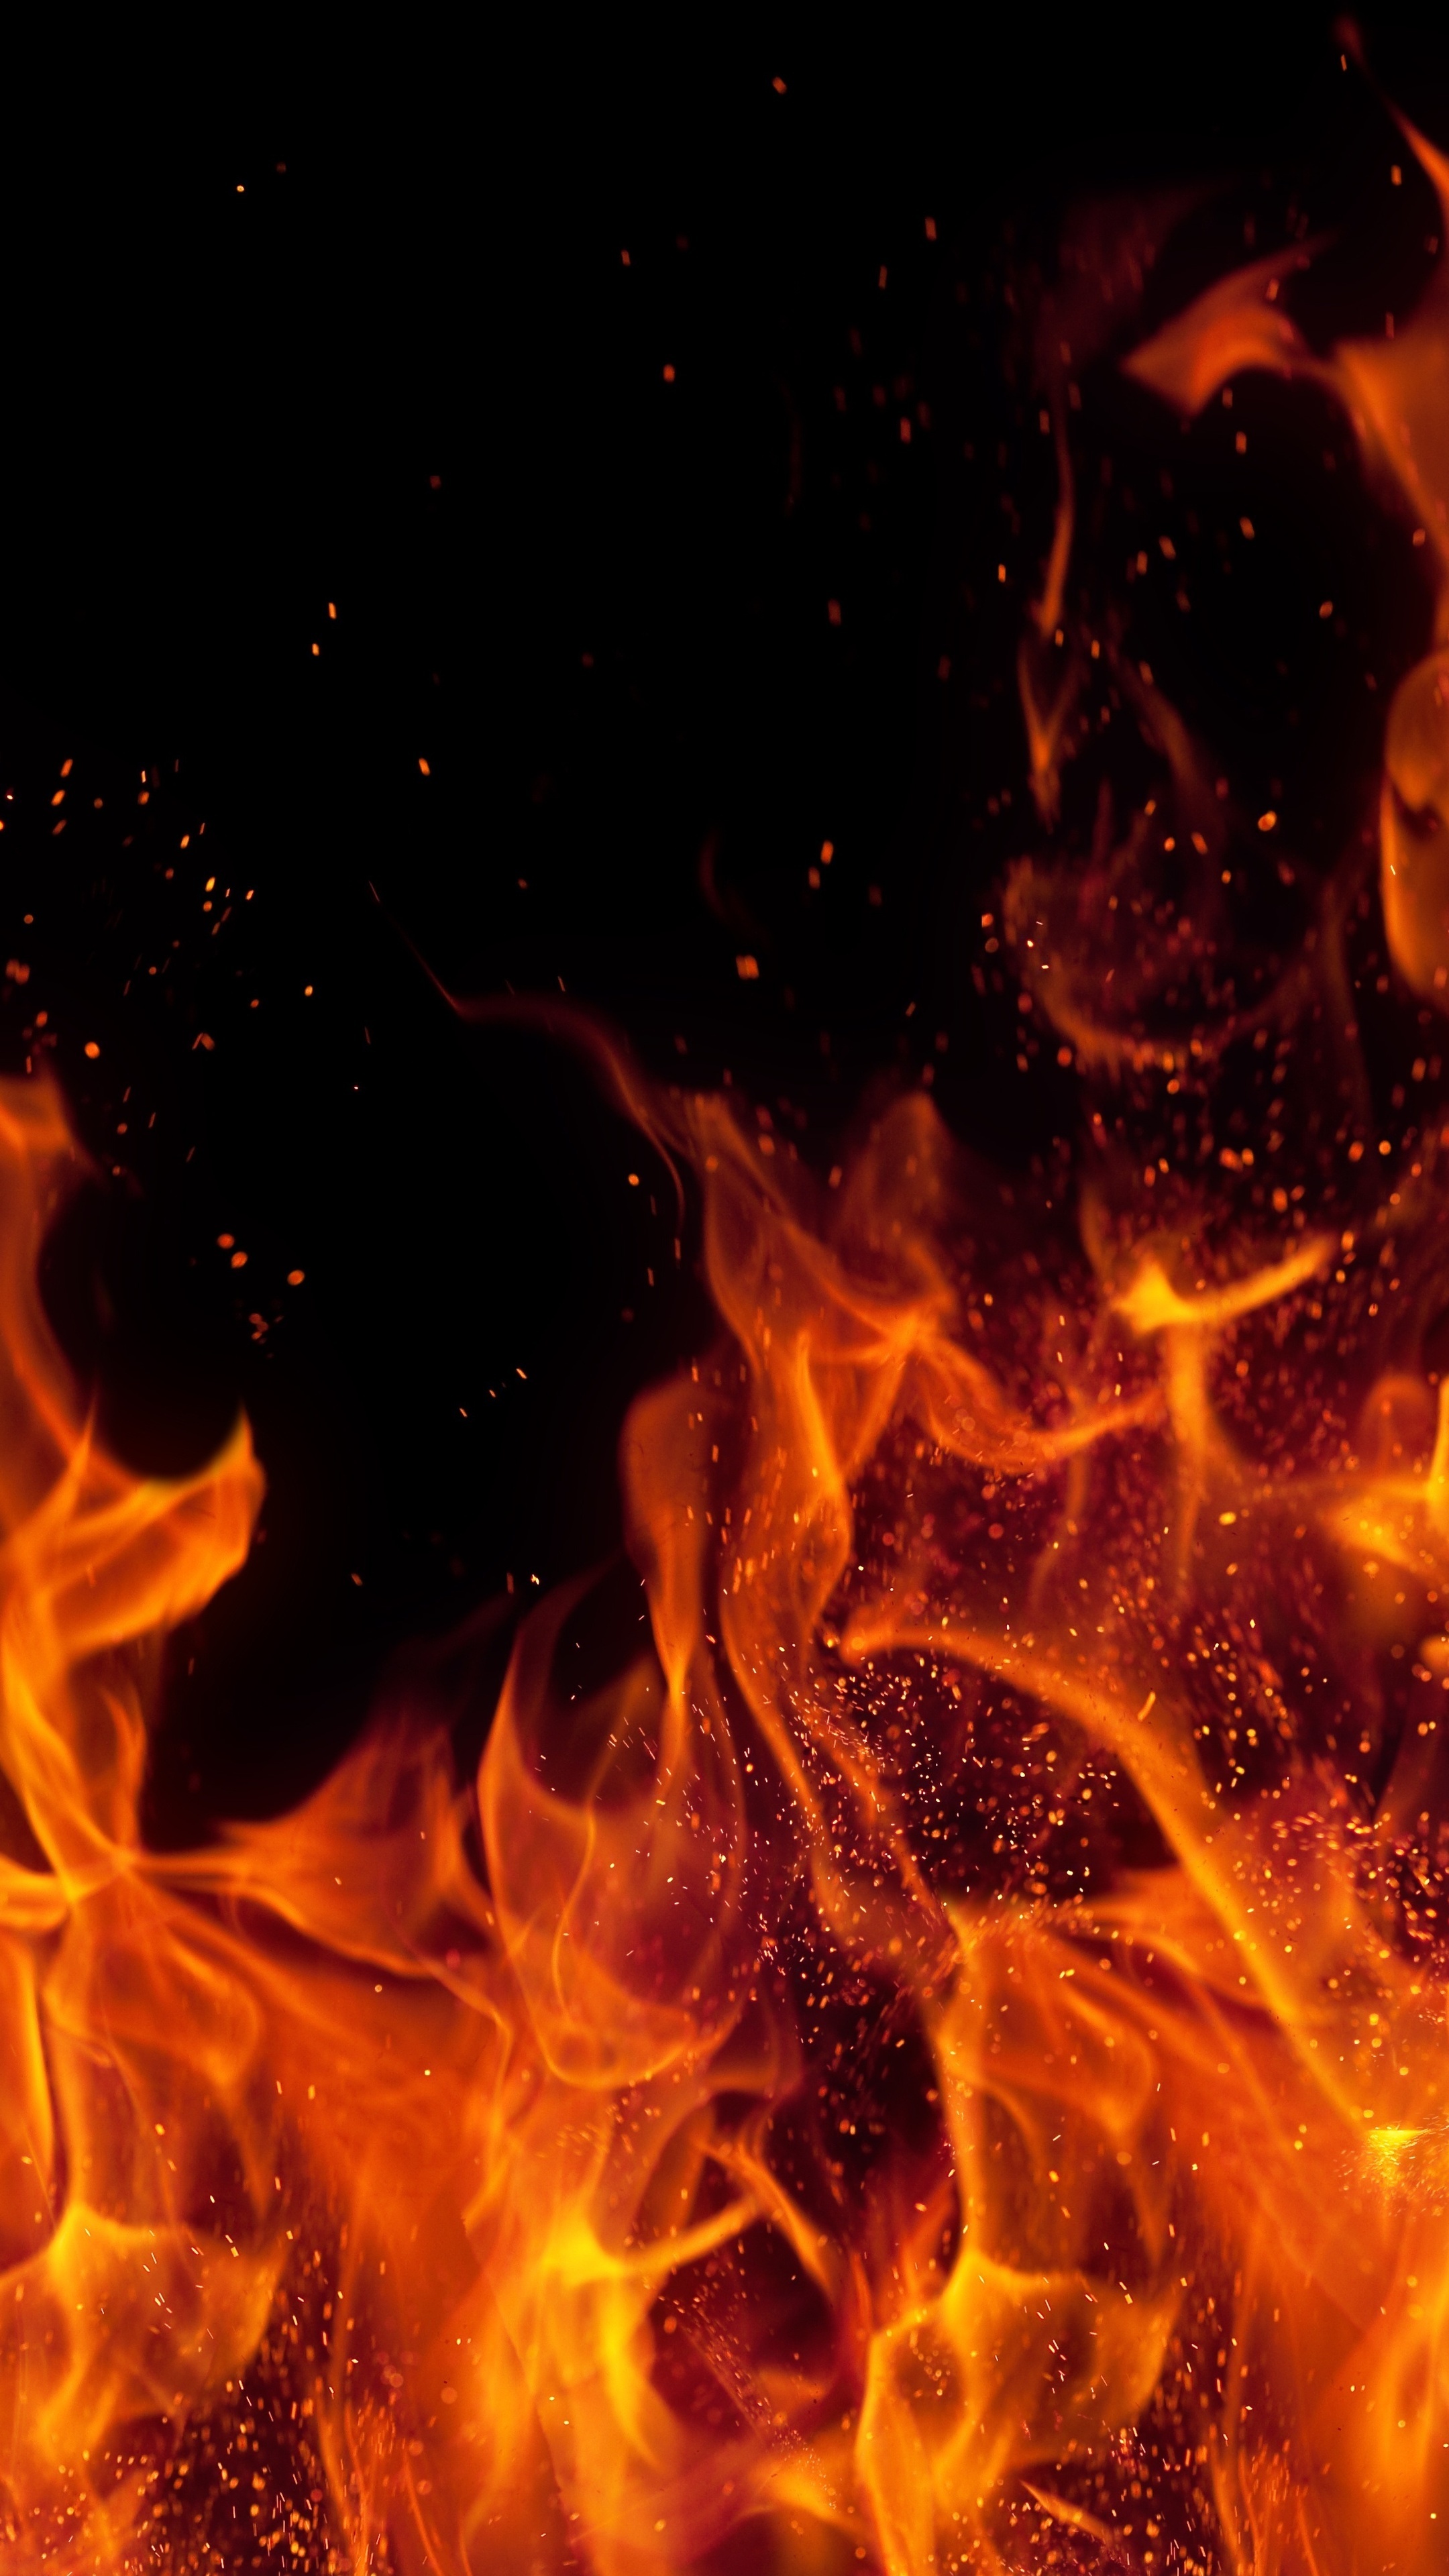 Red fire beauty, Sony Xperia HD wallpapers, 4K flame visuals, Flame images, Fire wallpaper backgrounds, 2160x3840 4K Handy